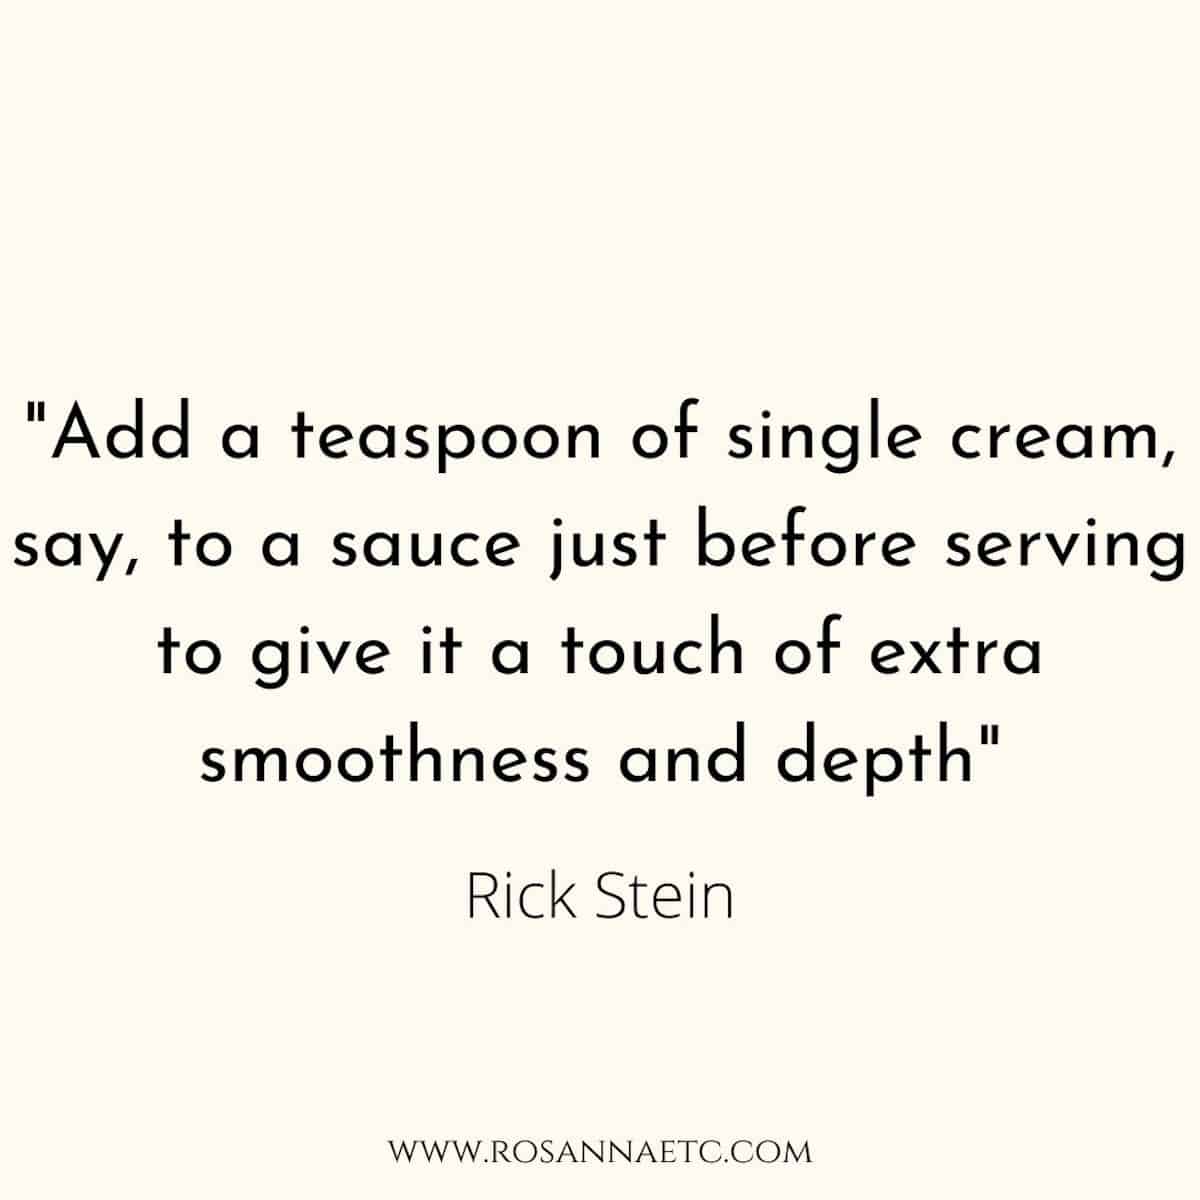 A quote from famous chef Rick Stein "Add a teaspoon of single cream to a sauce just before serving to give it a touch of extra smoothness and depth".